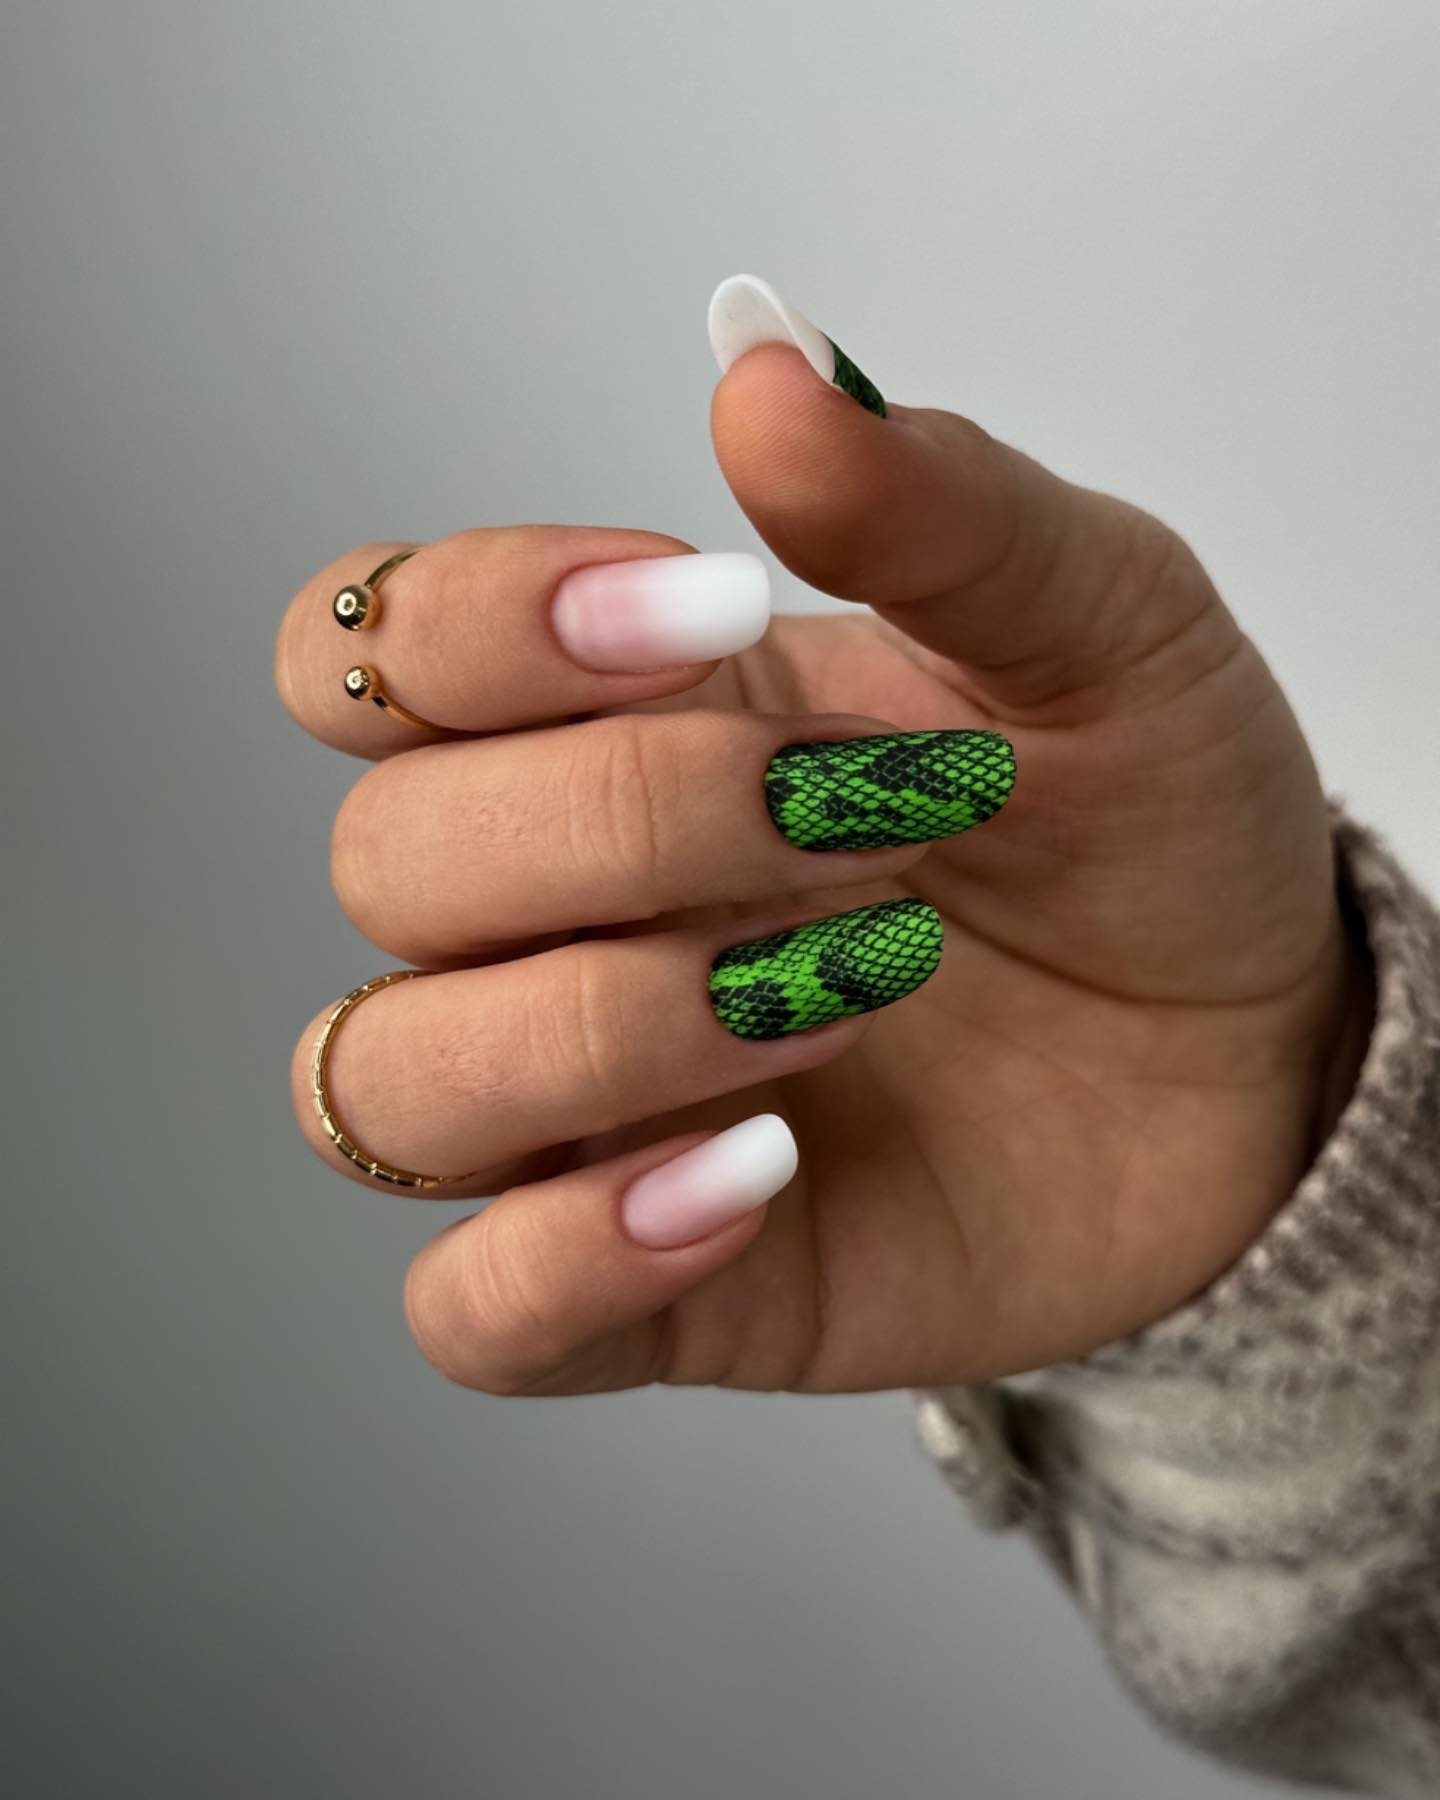 Green Snake Design with White Ombre Nails